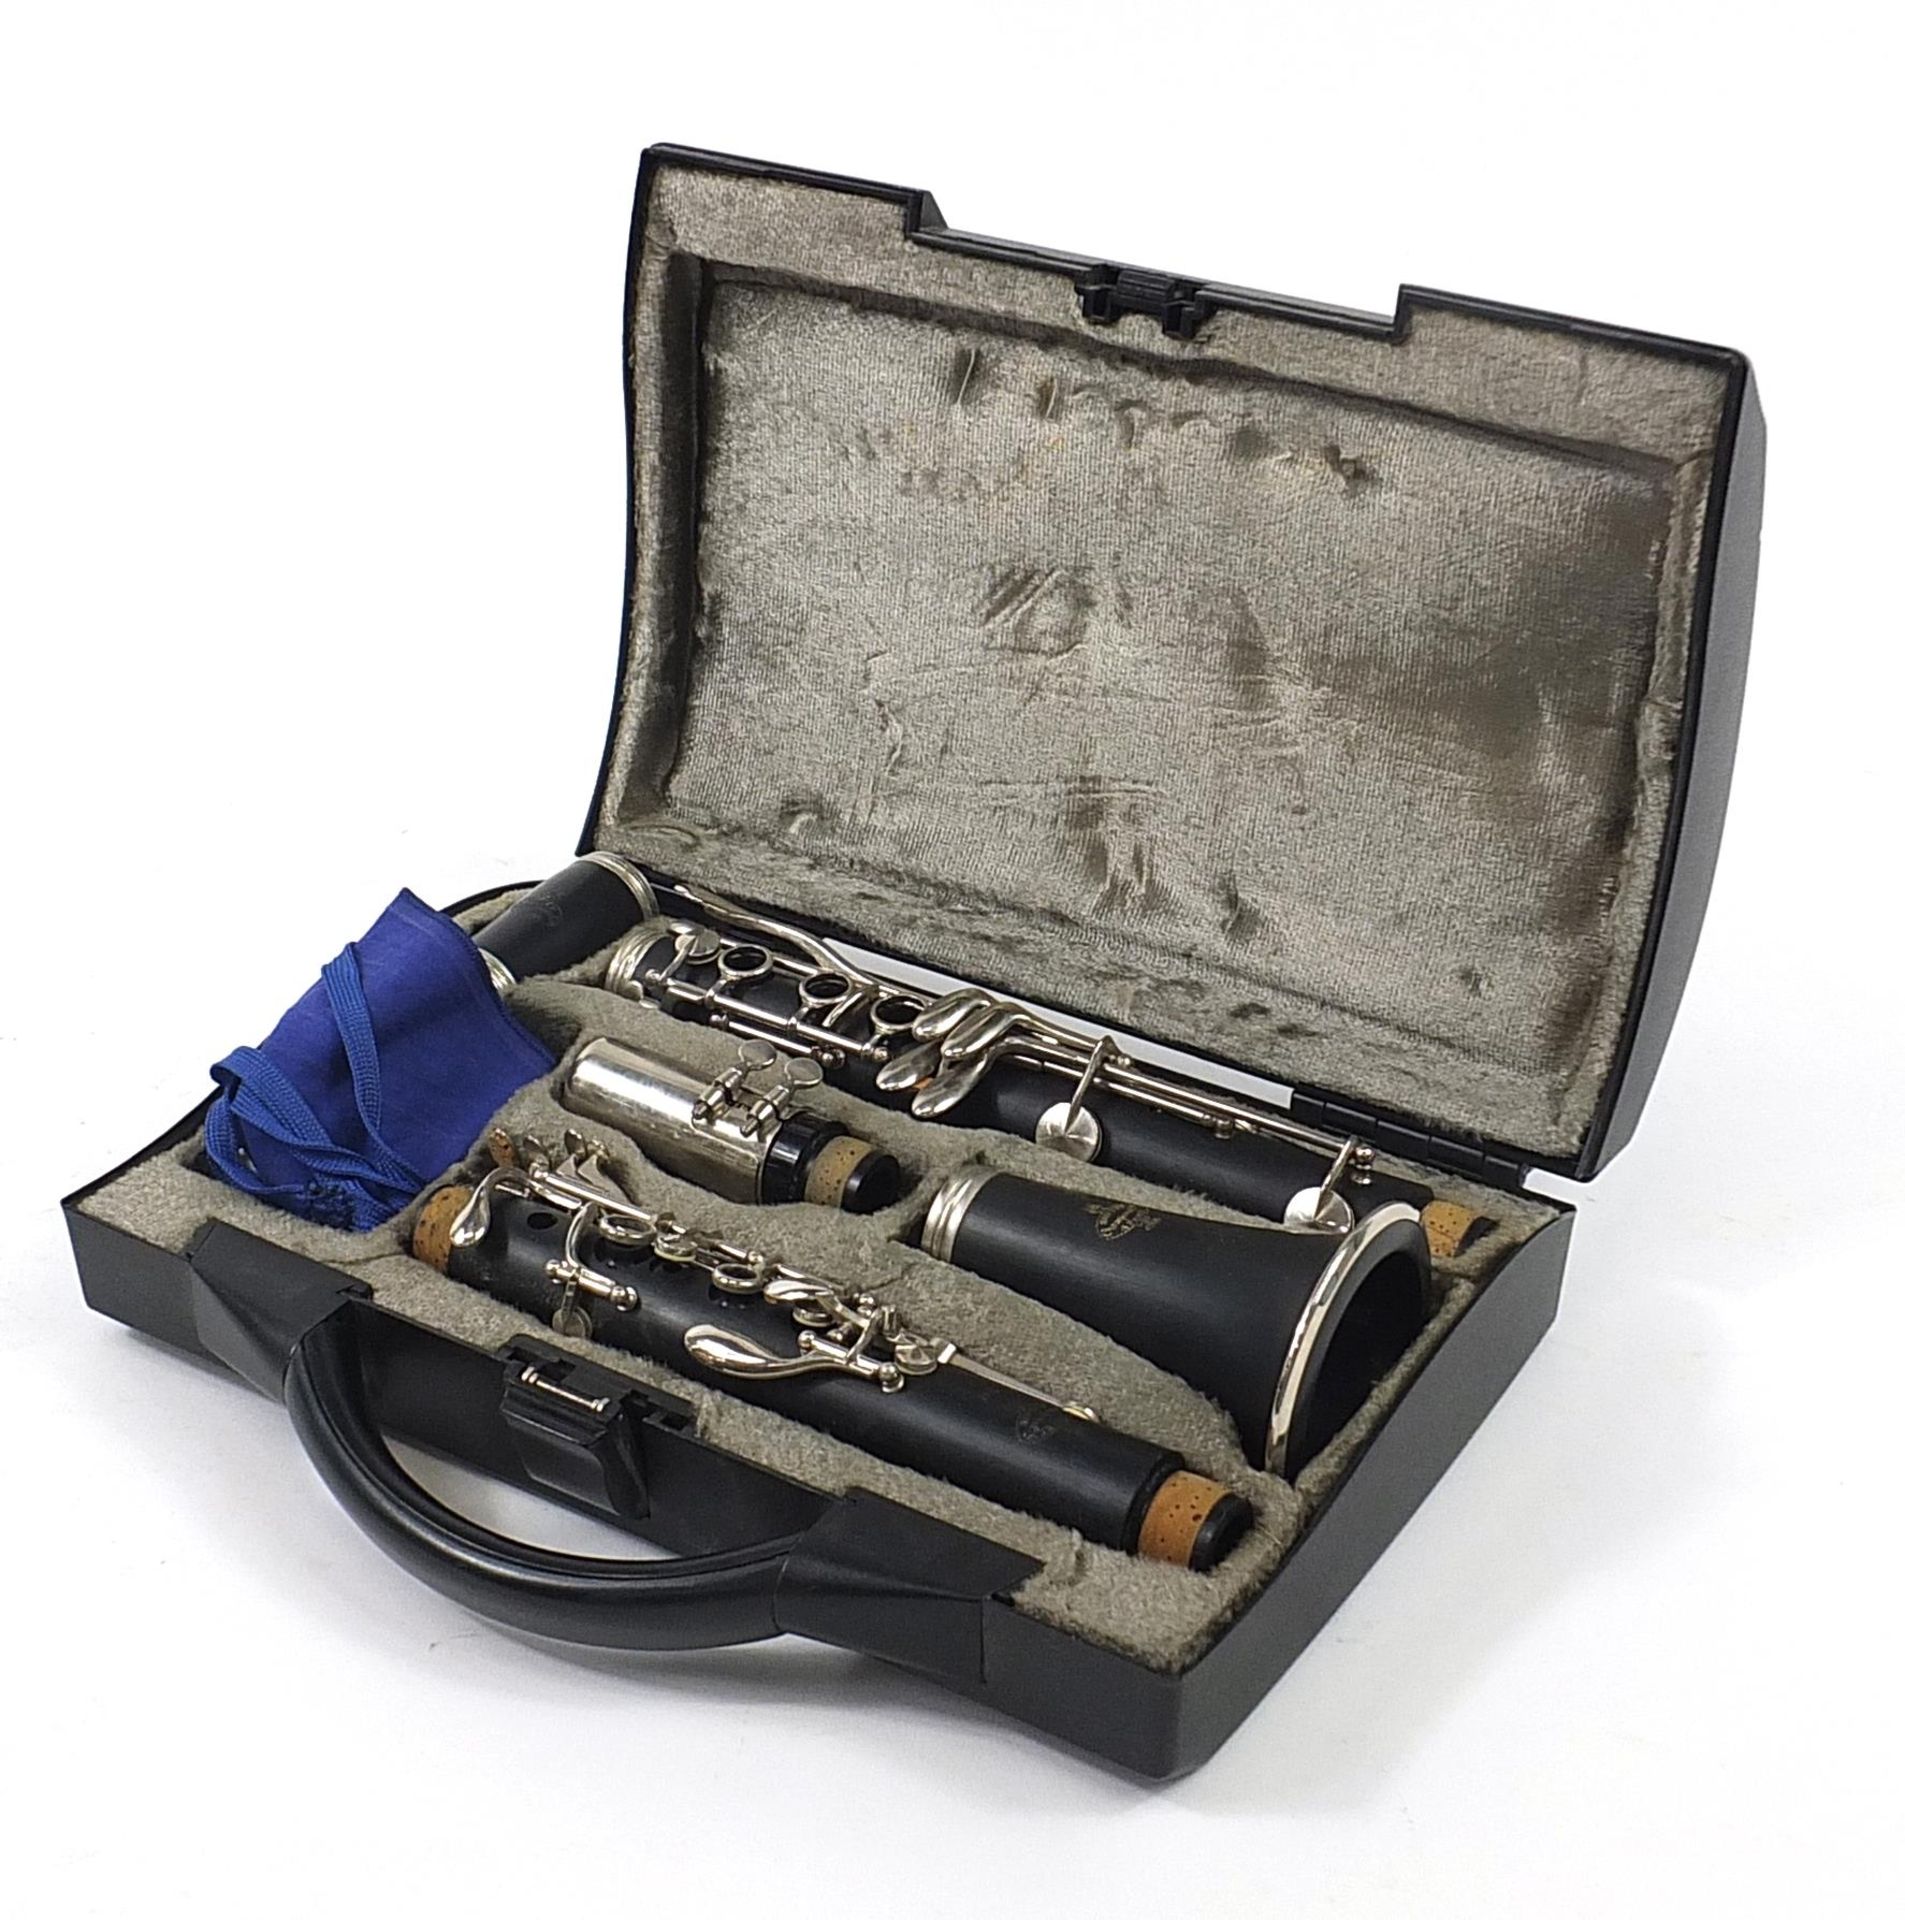 Buffet four piece ebonised clarinet retailed by Crampon & Co, Paris, housed in a fitted box - Image 6 of 7